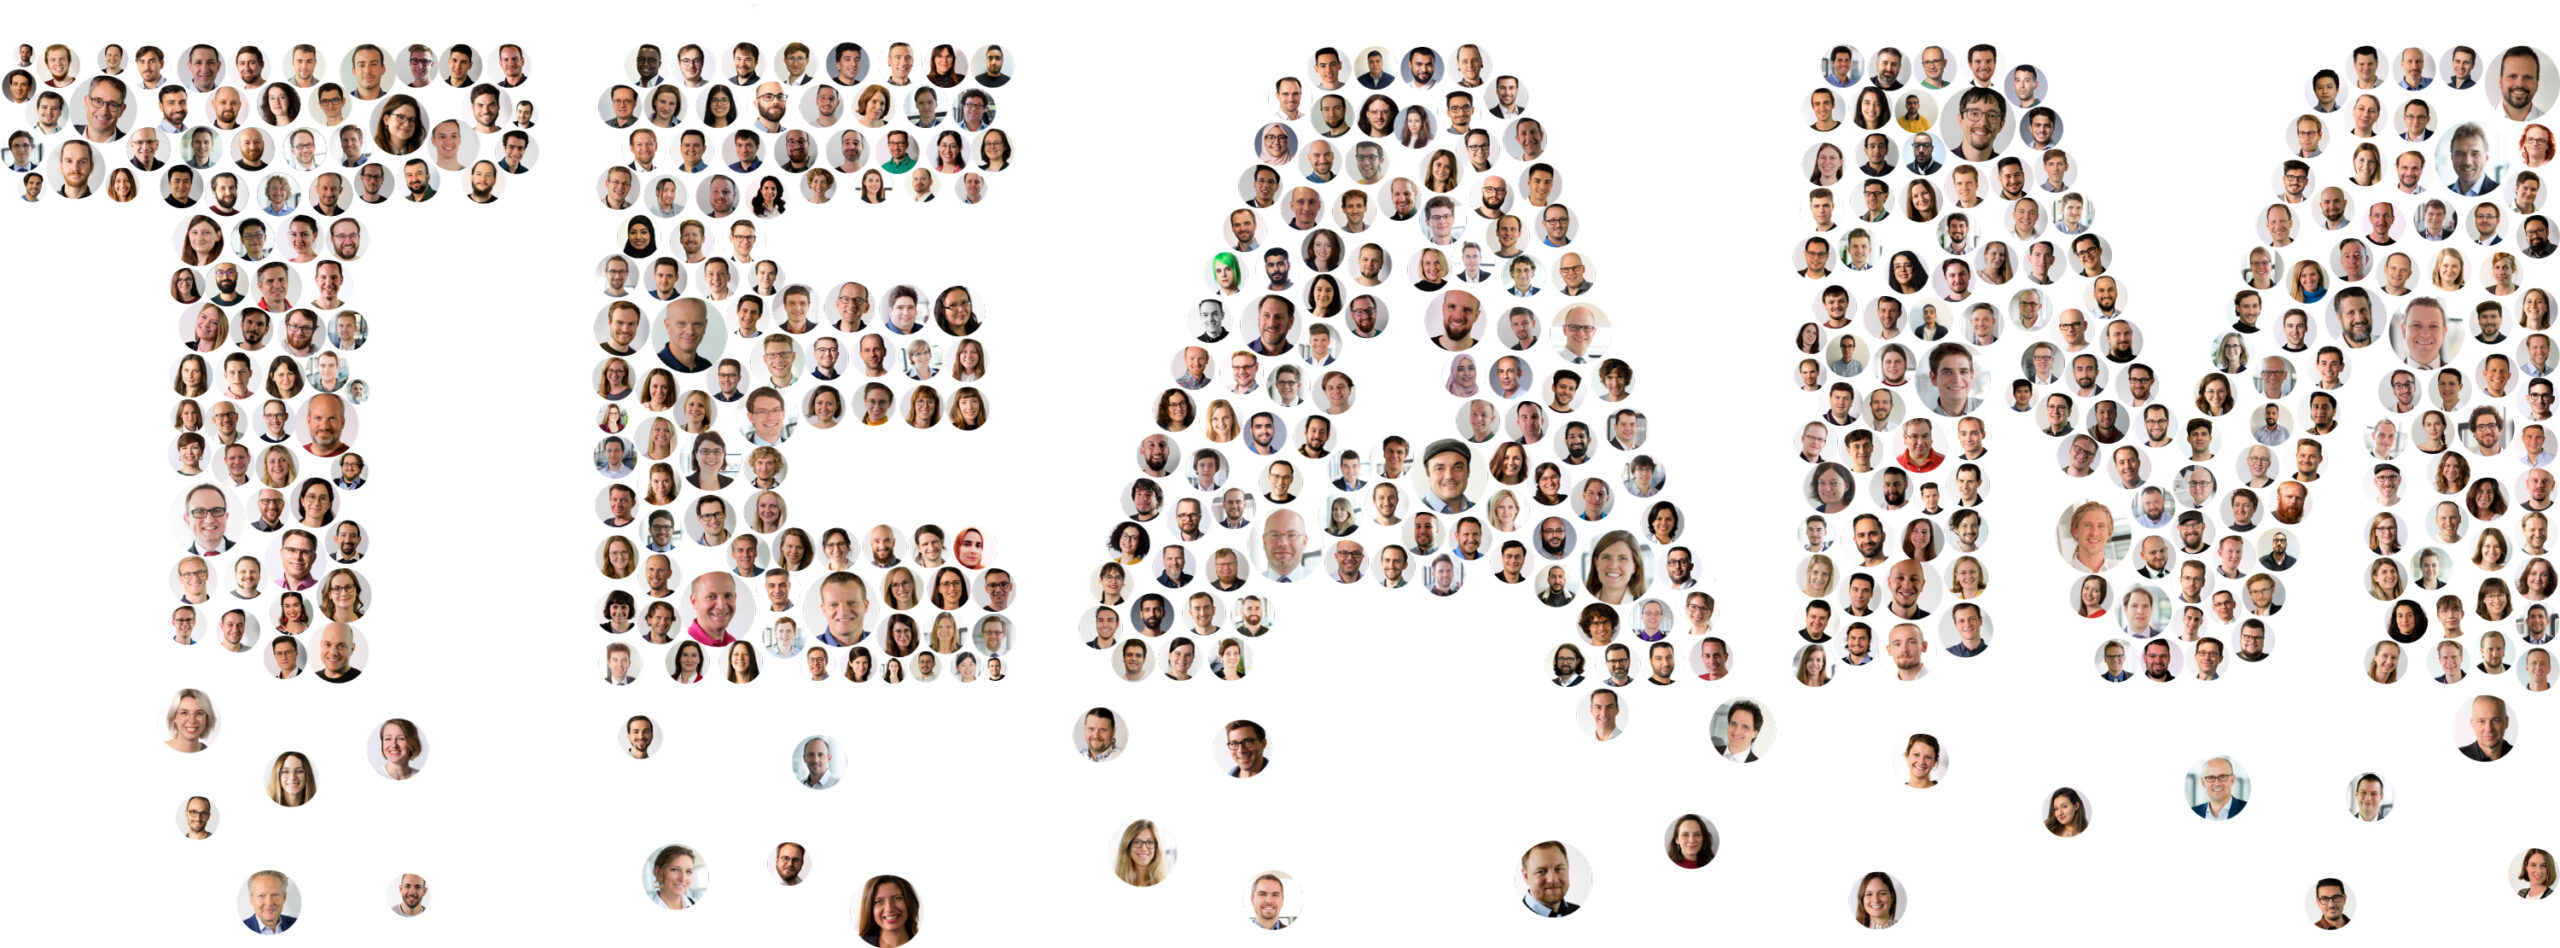 The word "team" is graphically represented by photo portraits of our employees. 